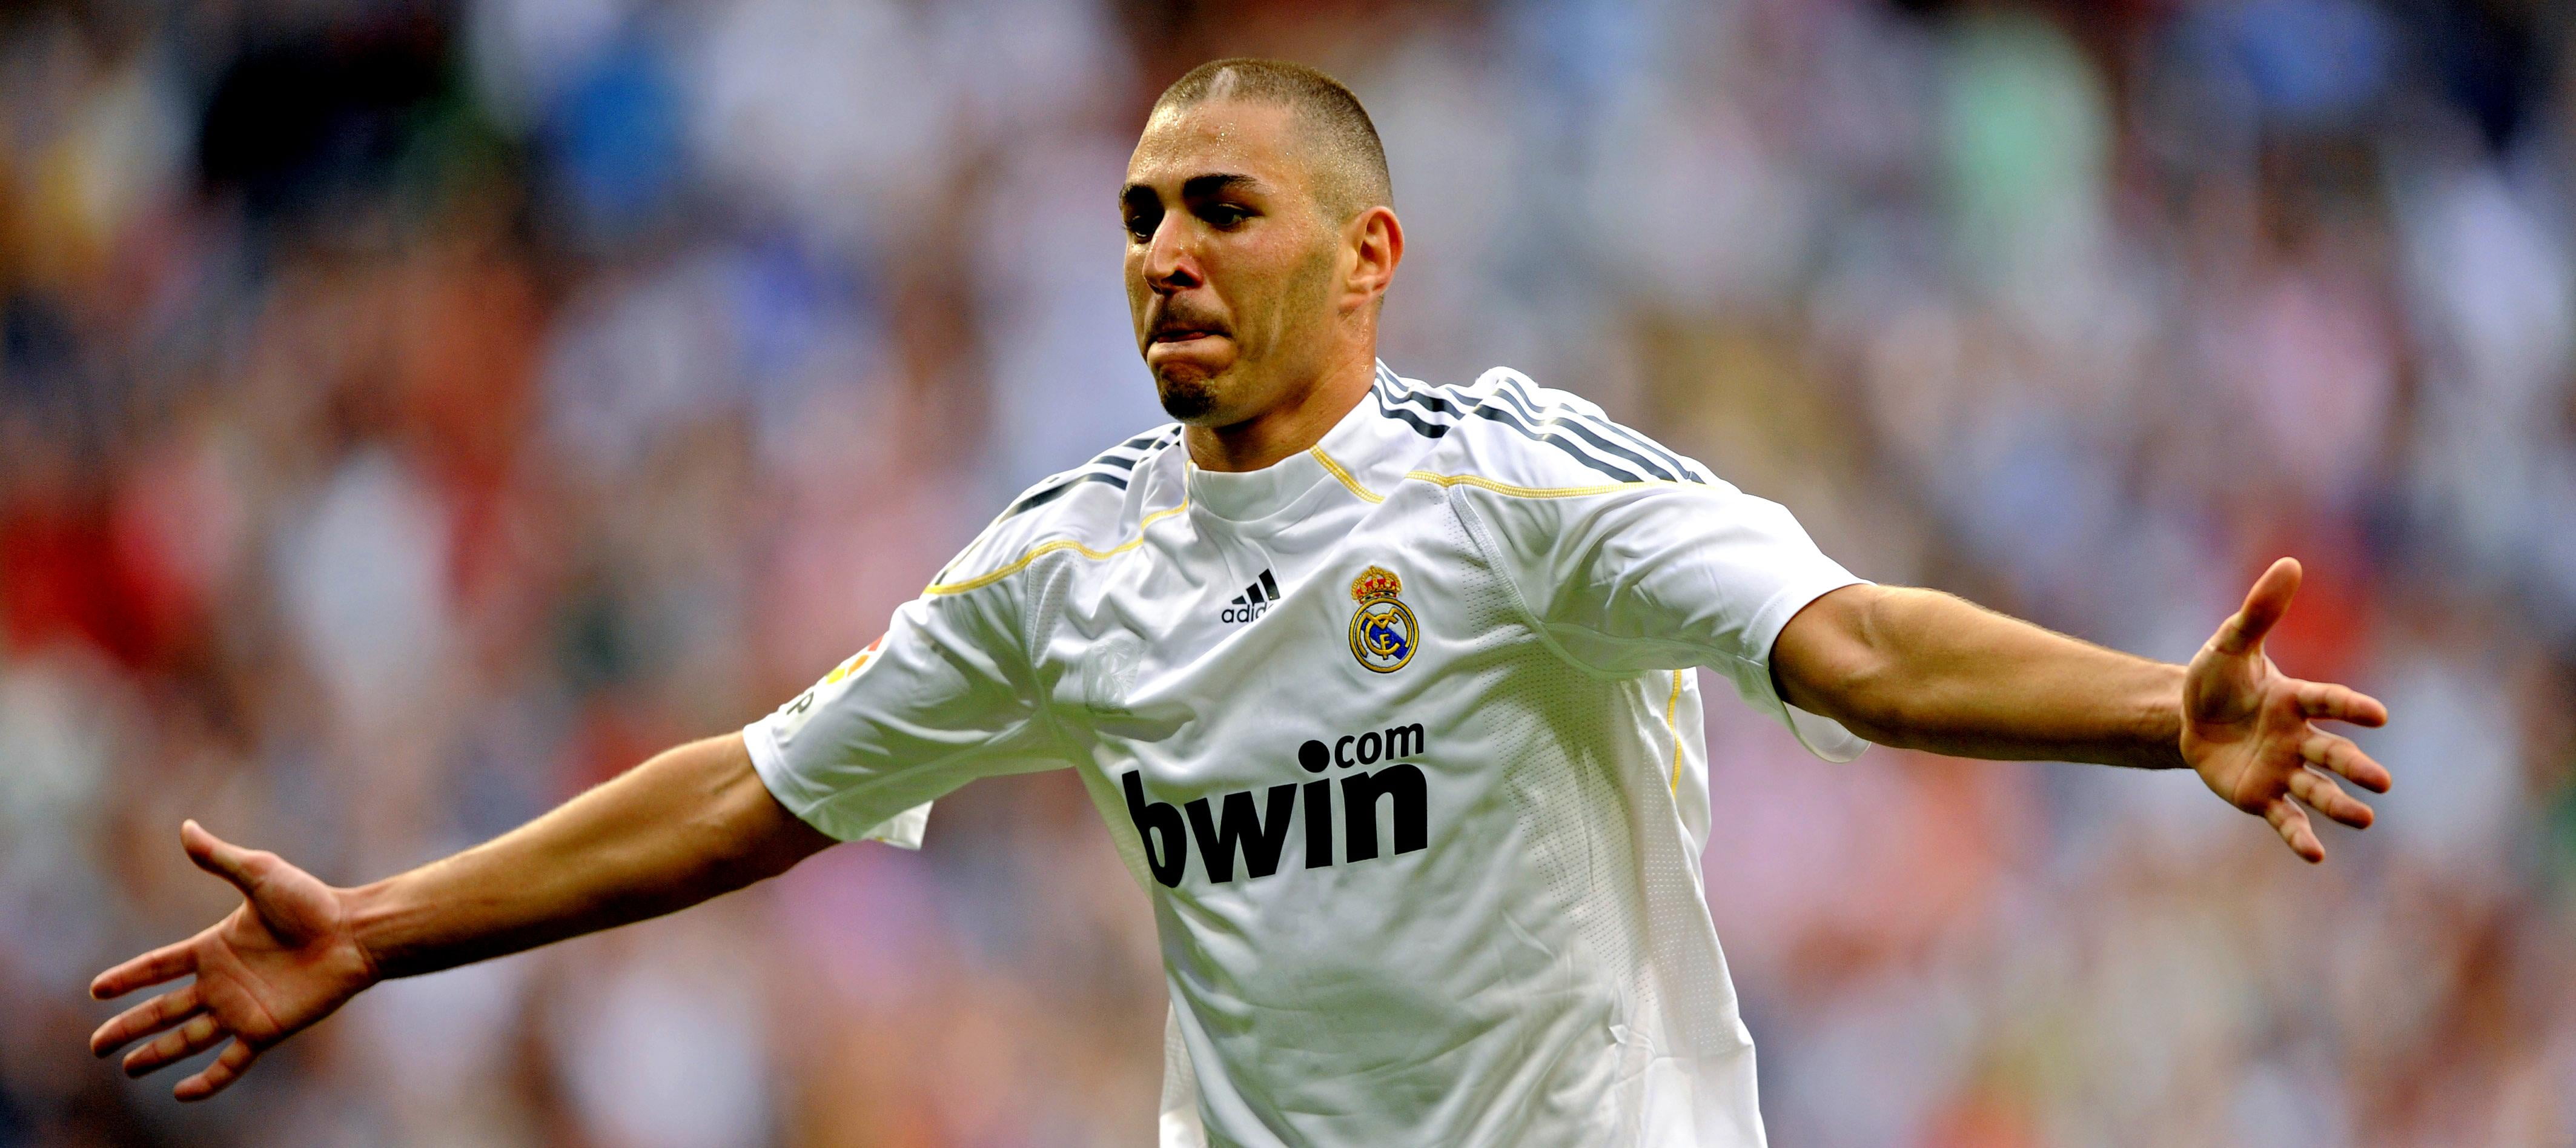 Karim Benzema, Sports, Football, french, one person, young adult